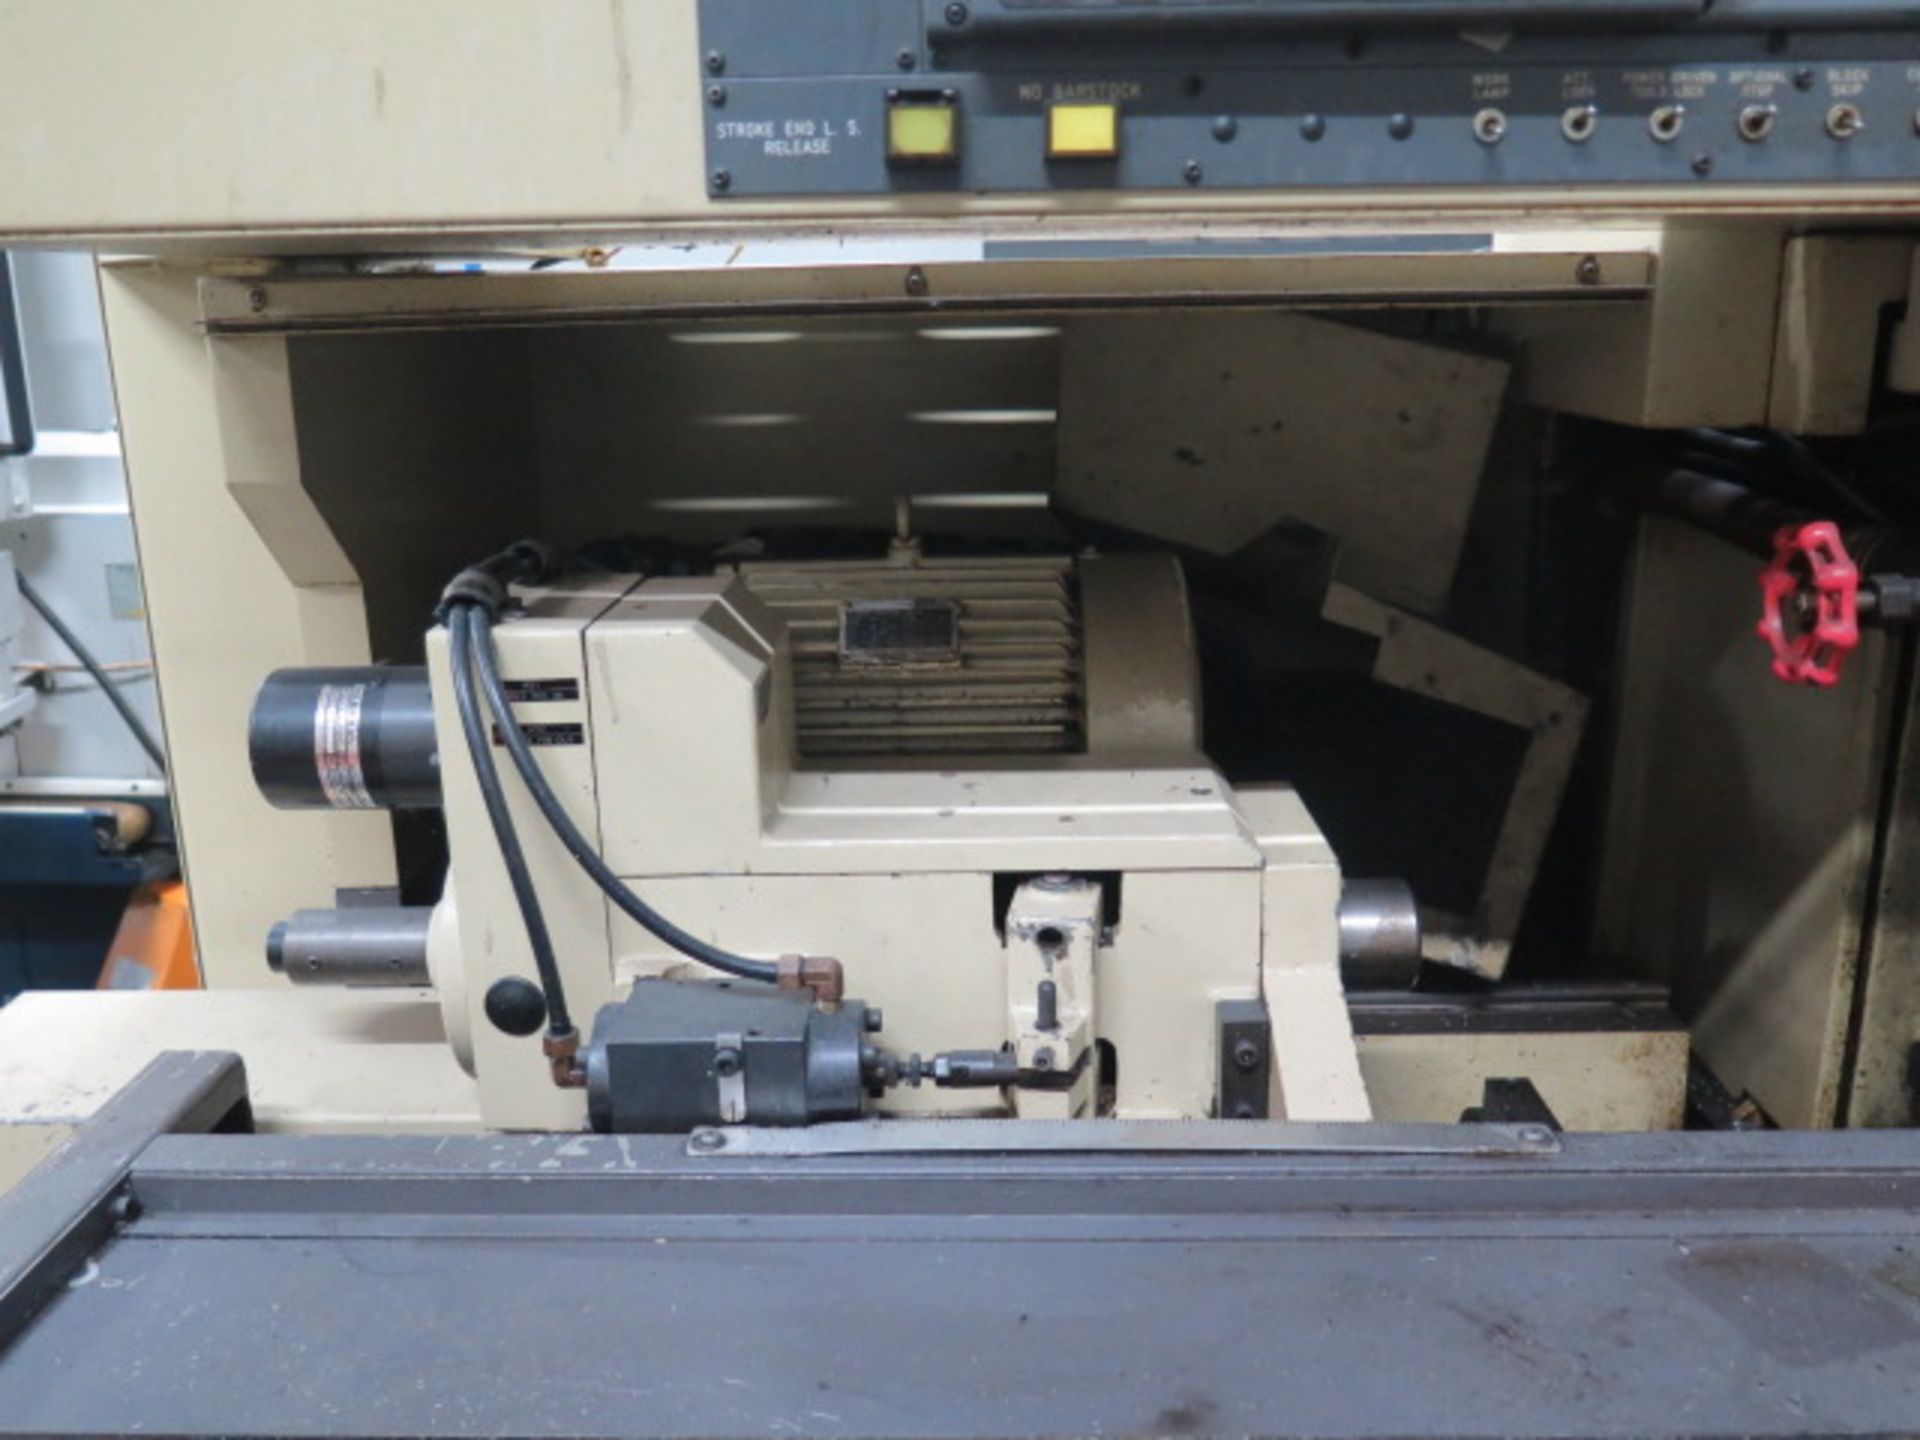 Star SST-16 CNC Screw Machine s/n 010362 w/ Fanuc Series 0-TT Controls, Sub Spindle, SOLD AS IS - Image 7 of 19